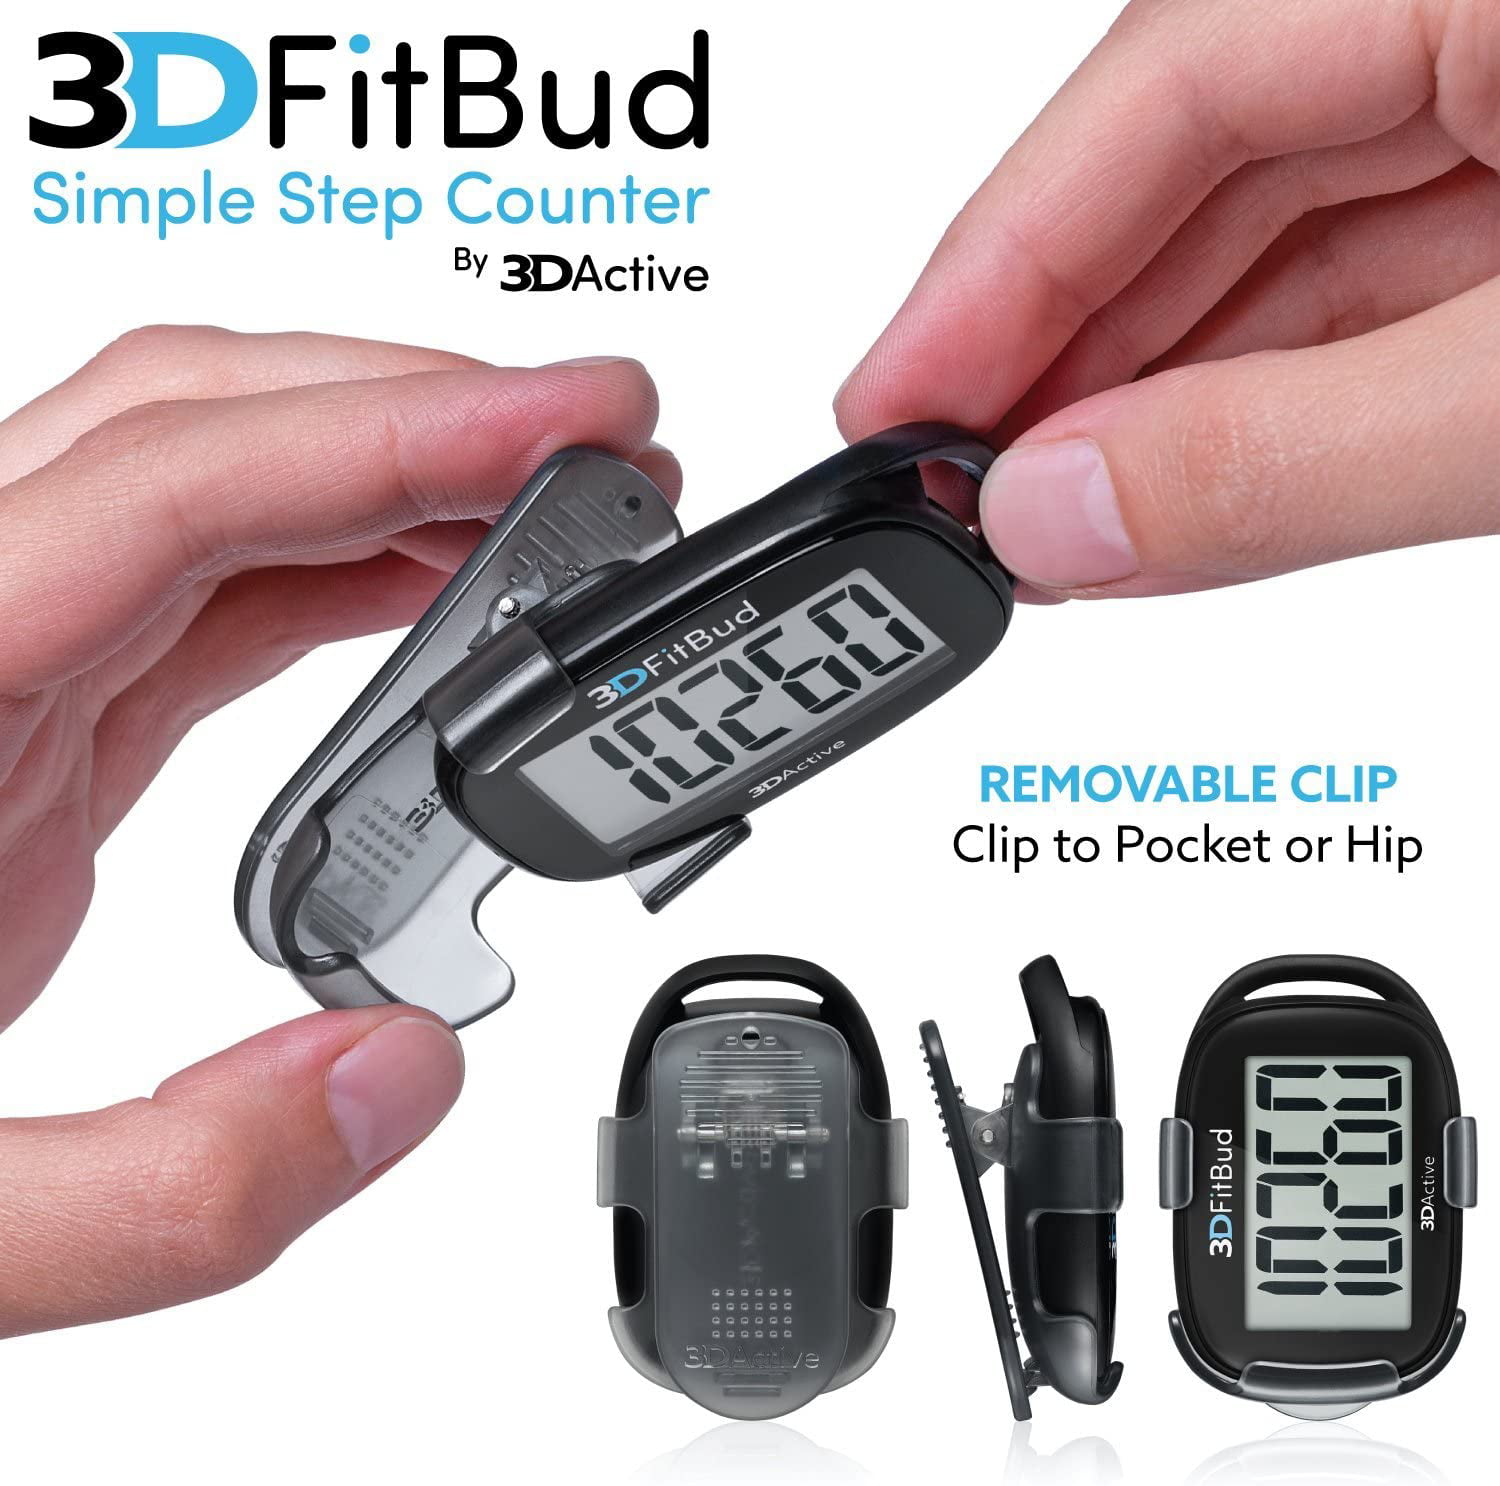 A420S 3DFitBud Simple Step Counter Walking 3D Pedometer with Lanyard Black 